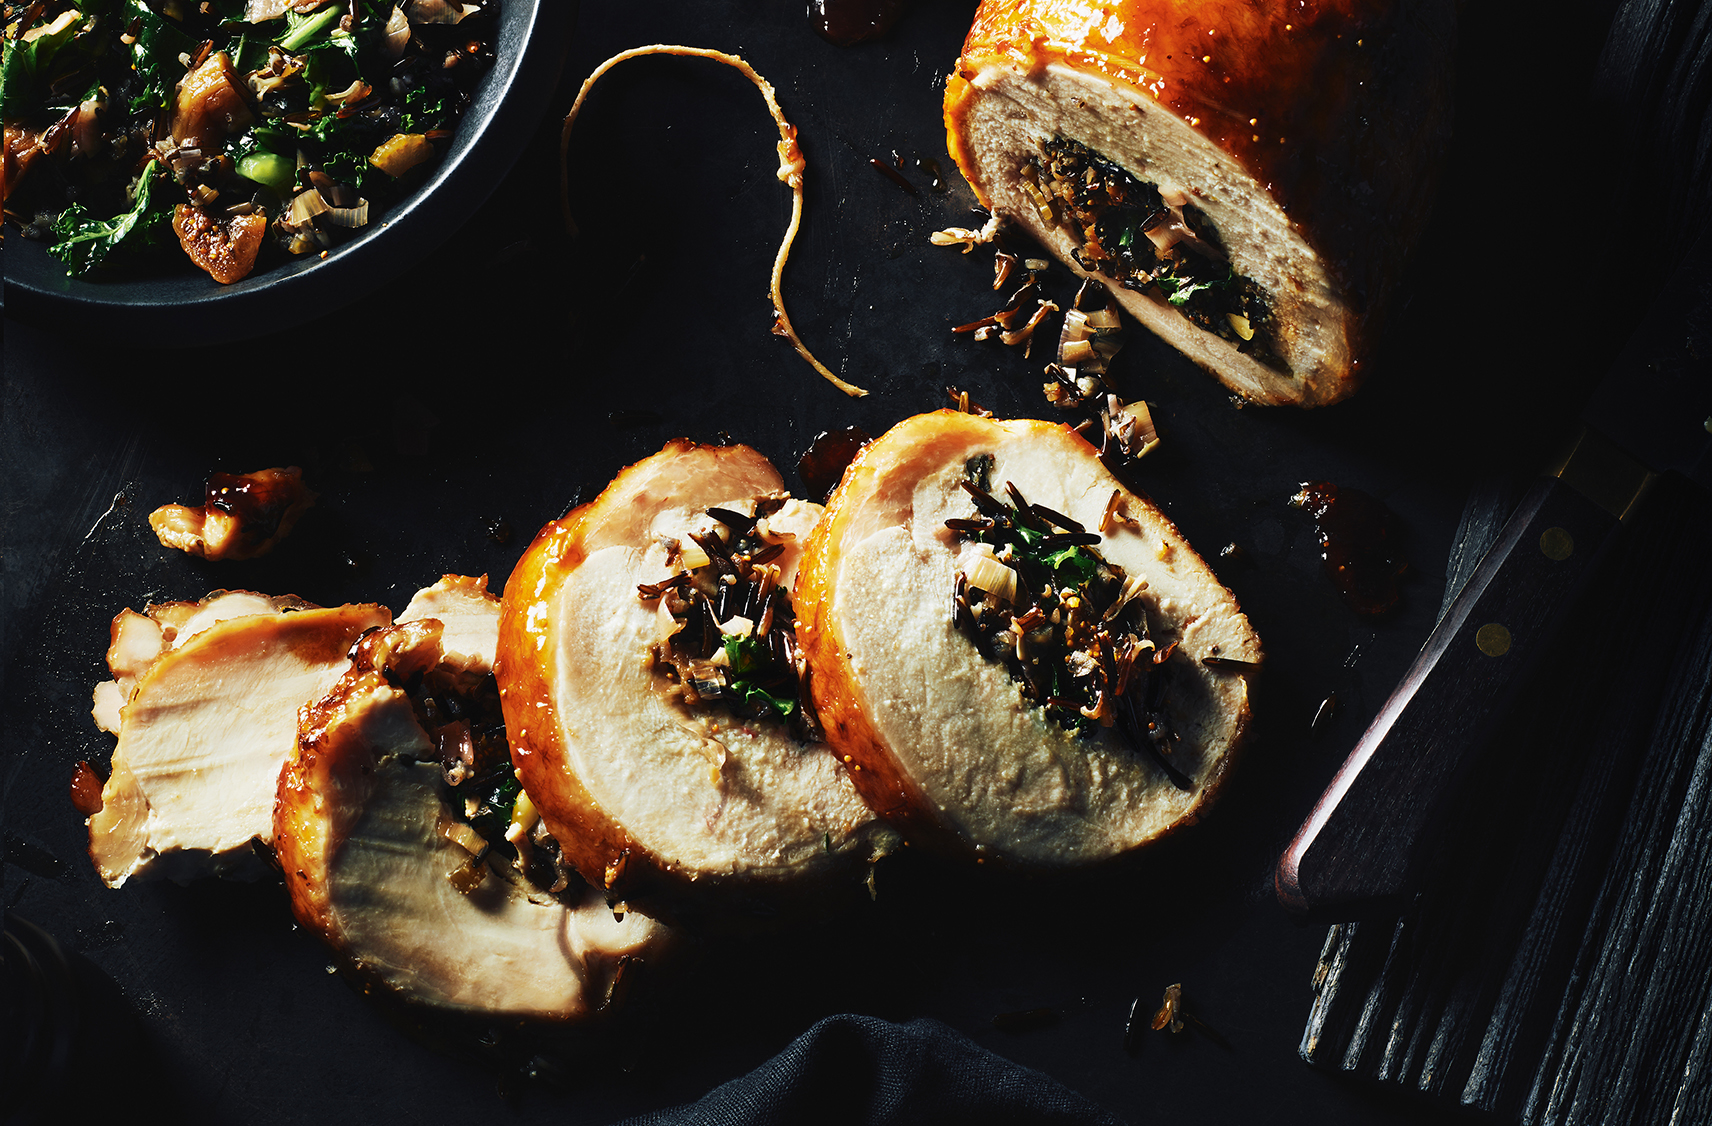 A partially sliced roast turkey with a fig cabernet stuffing in the center